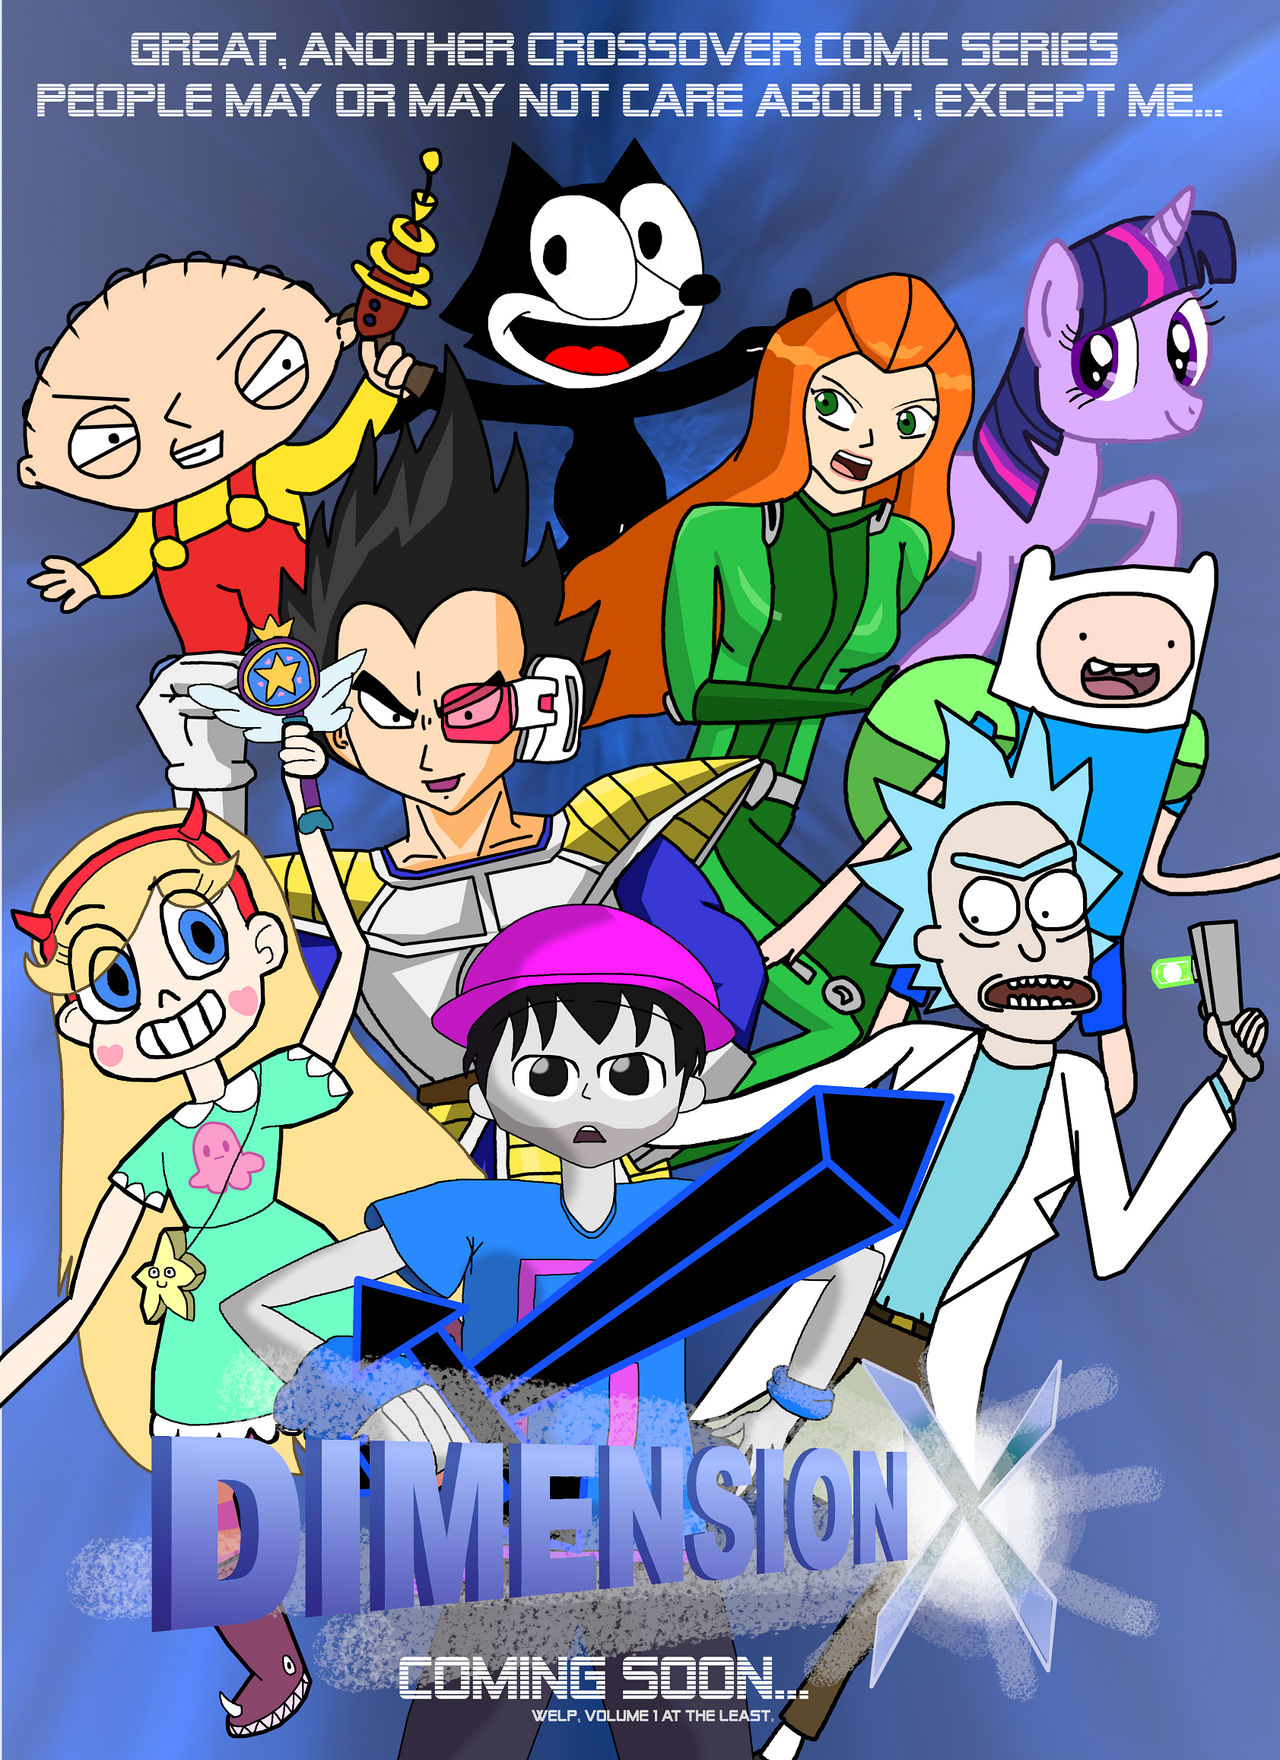 Cartoon Fighters Roster Updated by SuperMaster10 on DeviantArt